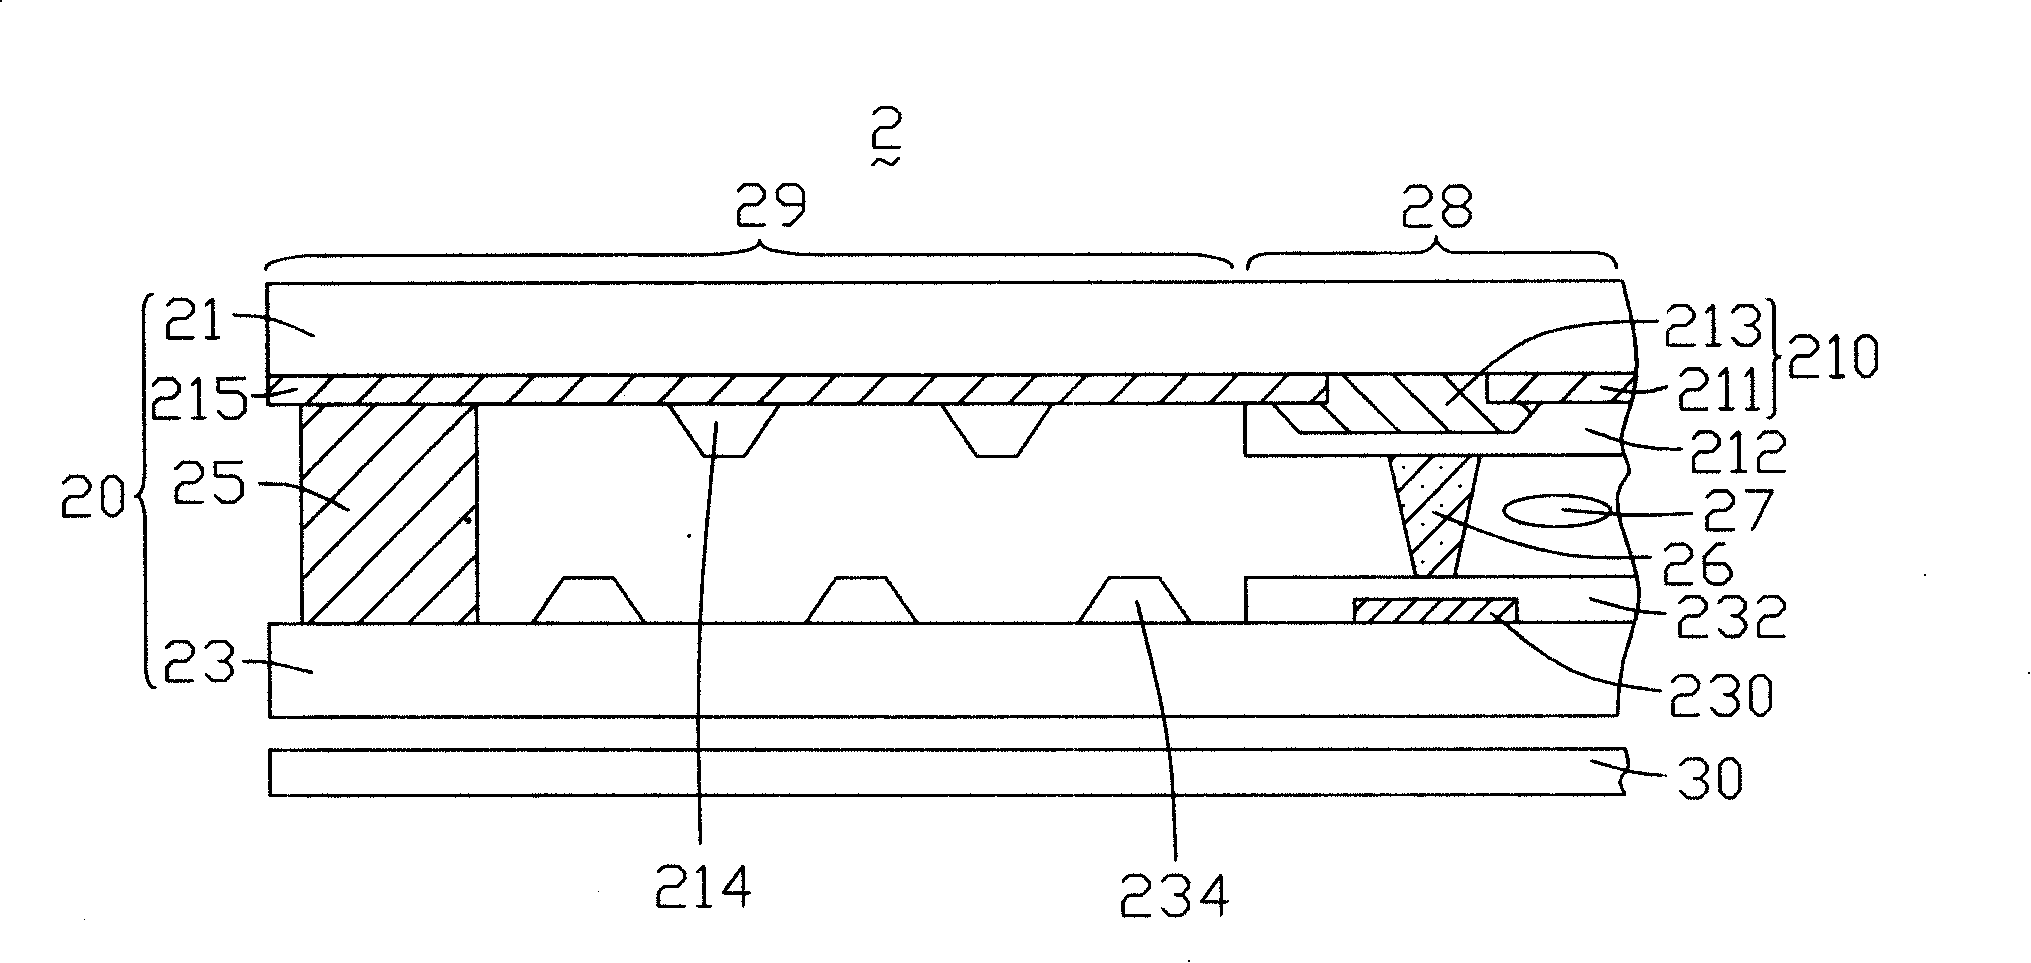 LCD display panel and device